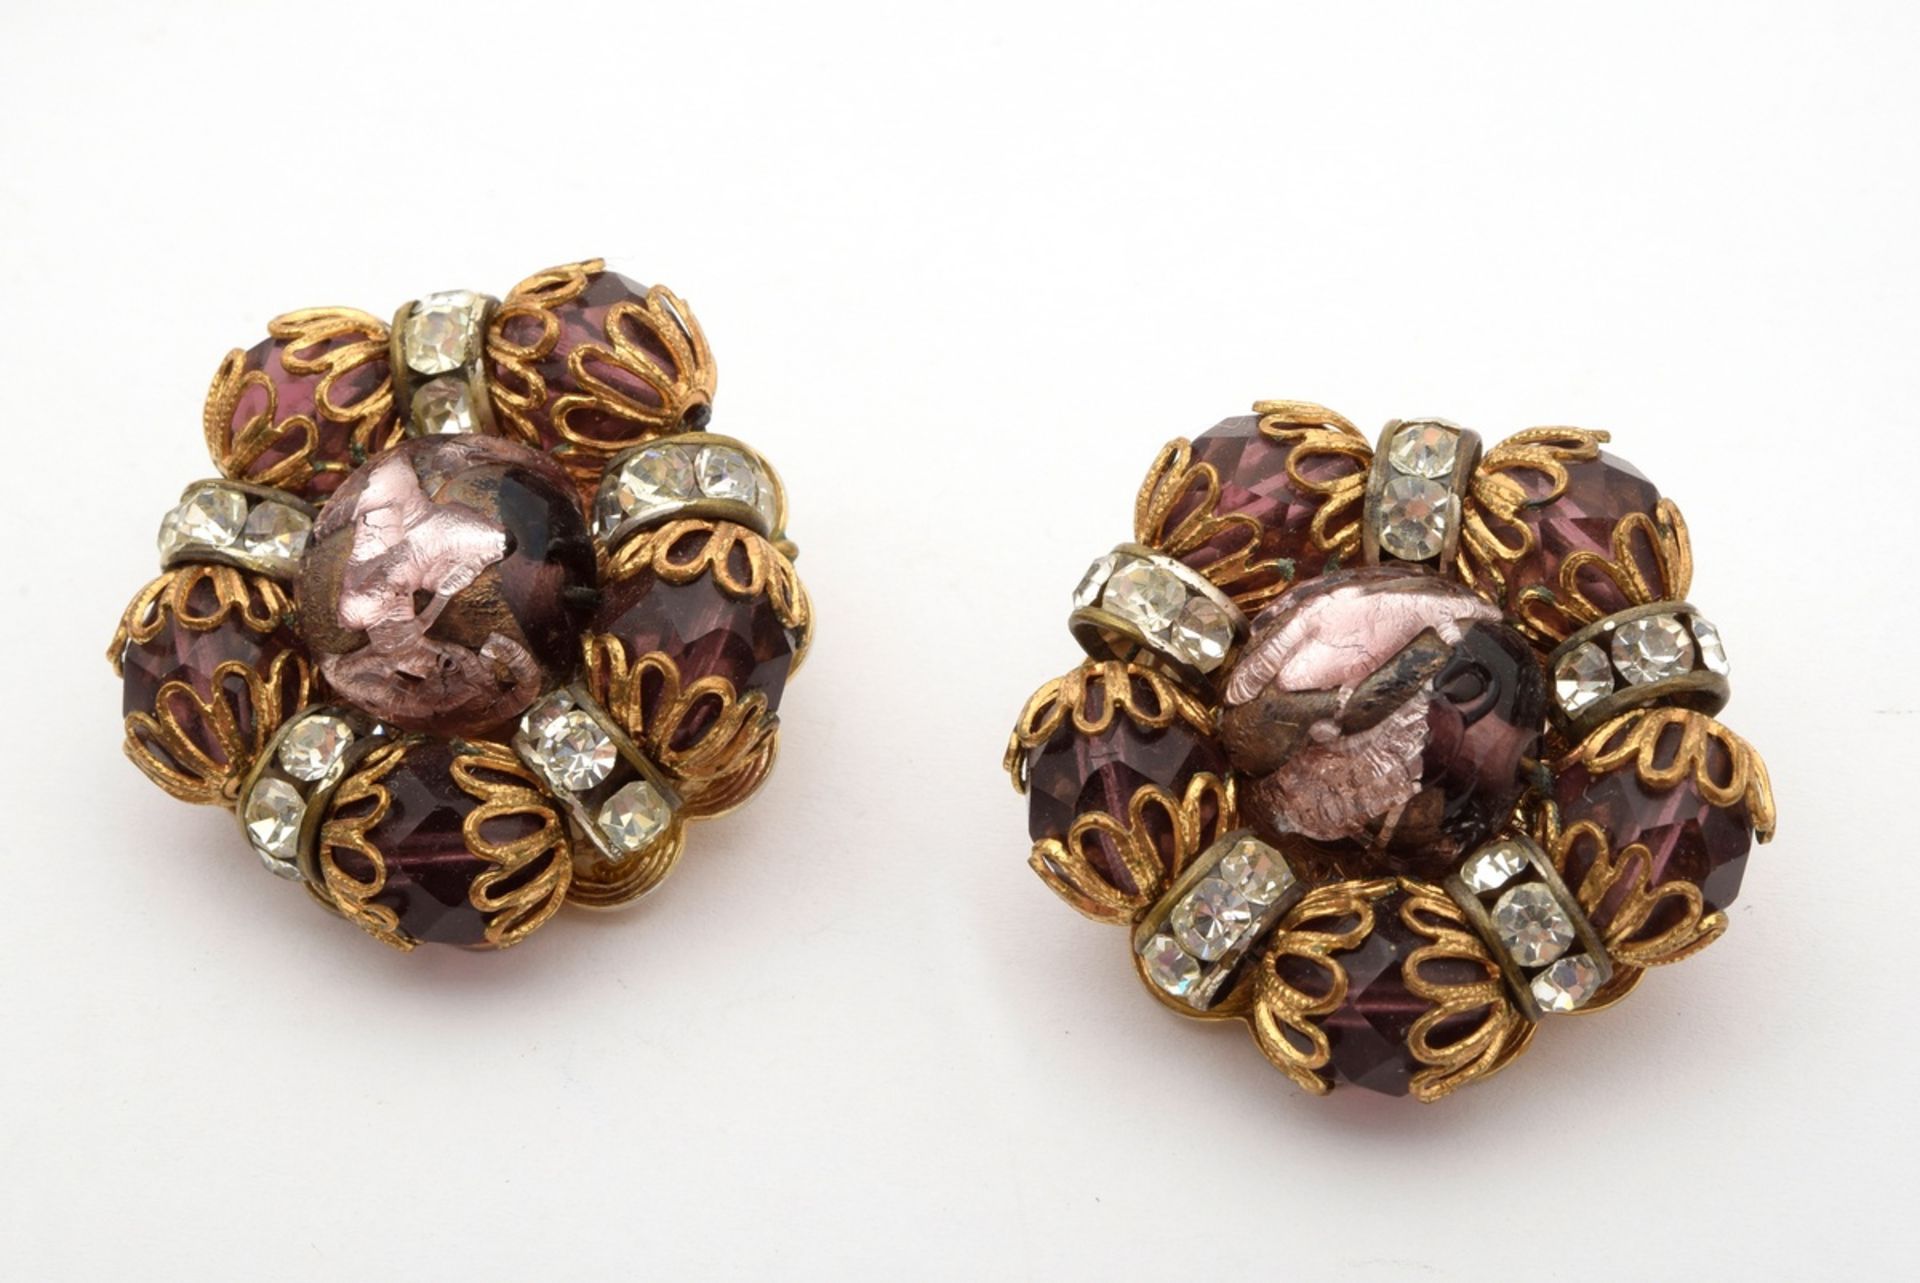 3 pieces of gold-plated vintage costume jewellery with violet glass and rhinestones, signed "Hobé": - Image 2 of 6